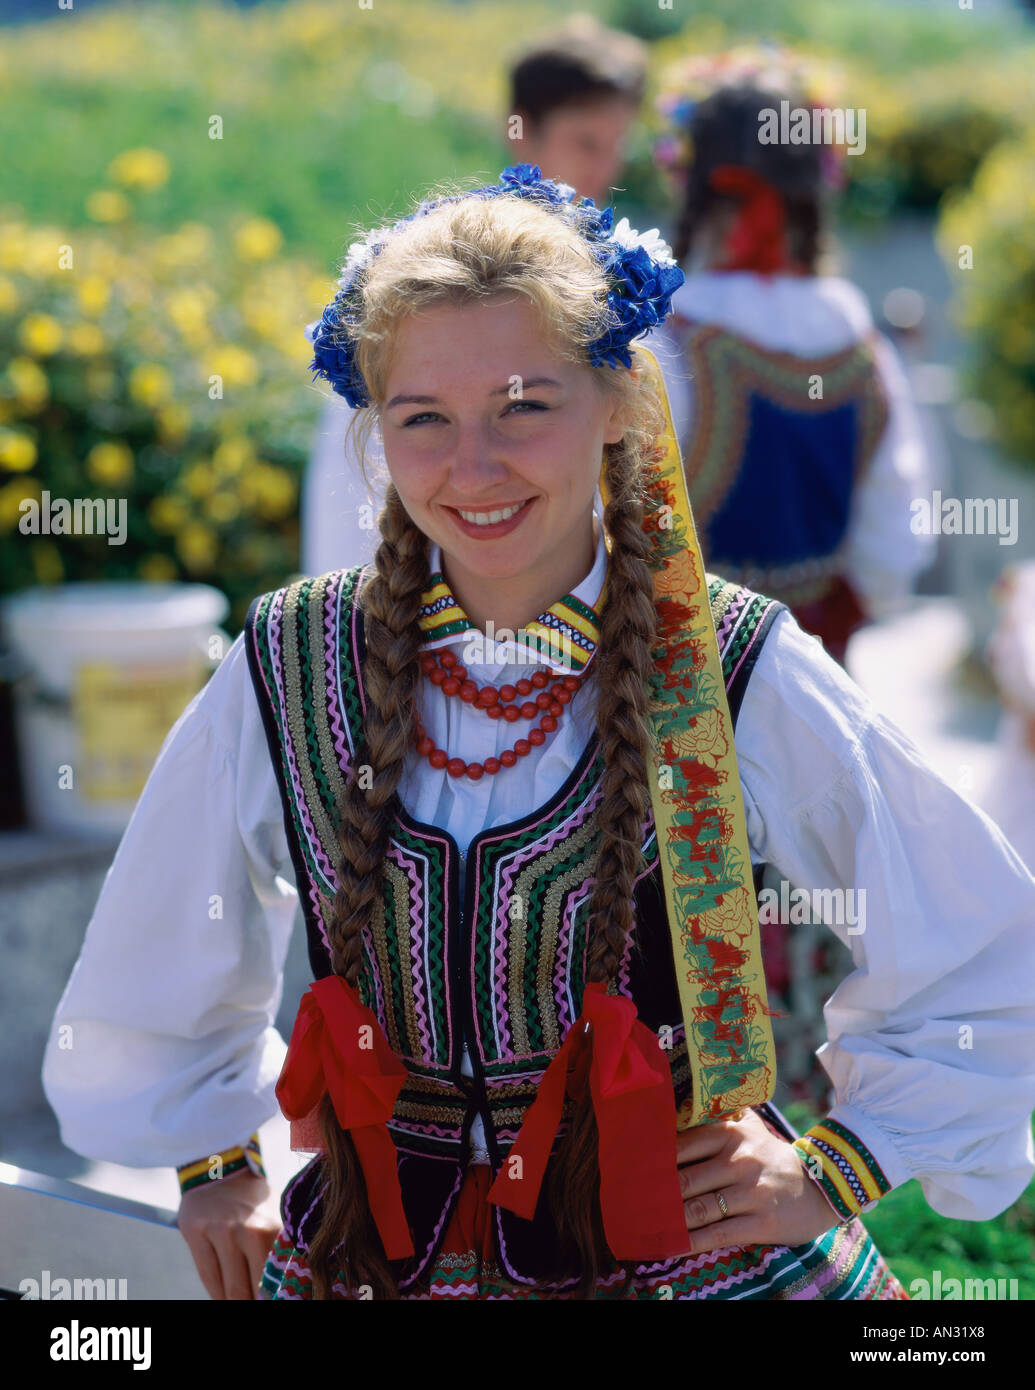 Girl Dressed in Traditional Polish Costume, Warsaw, Poland Stock Photo